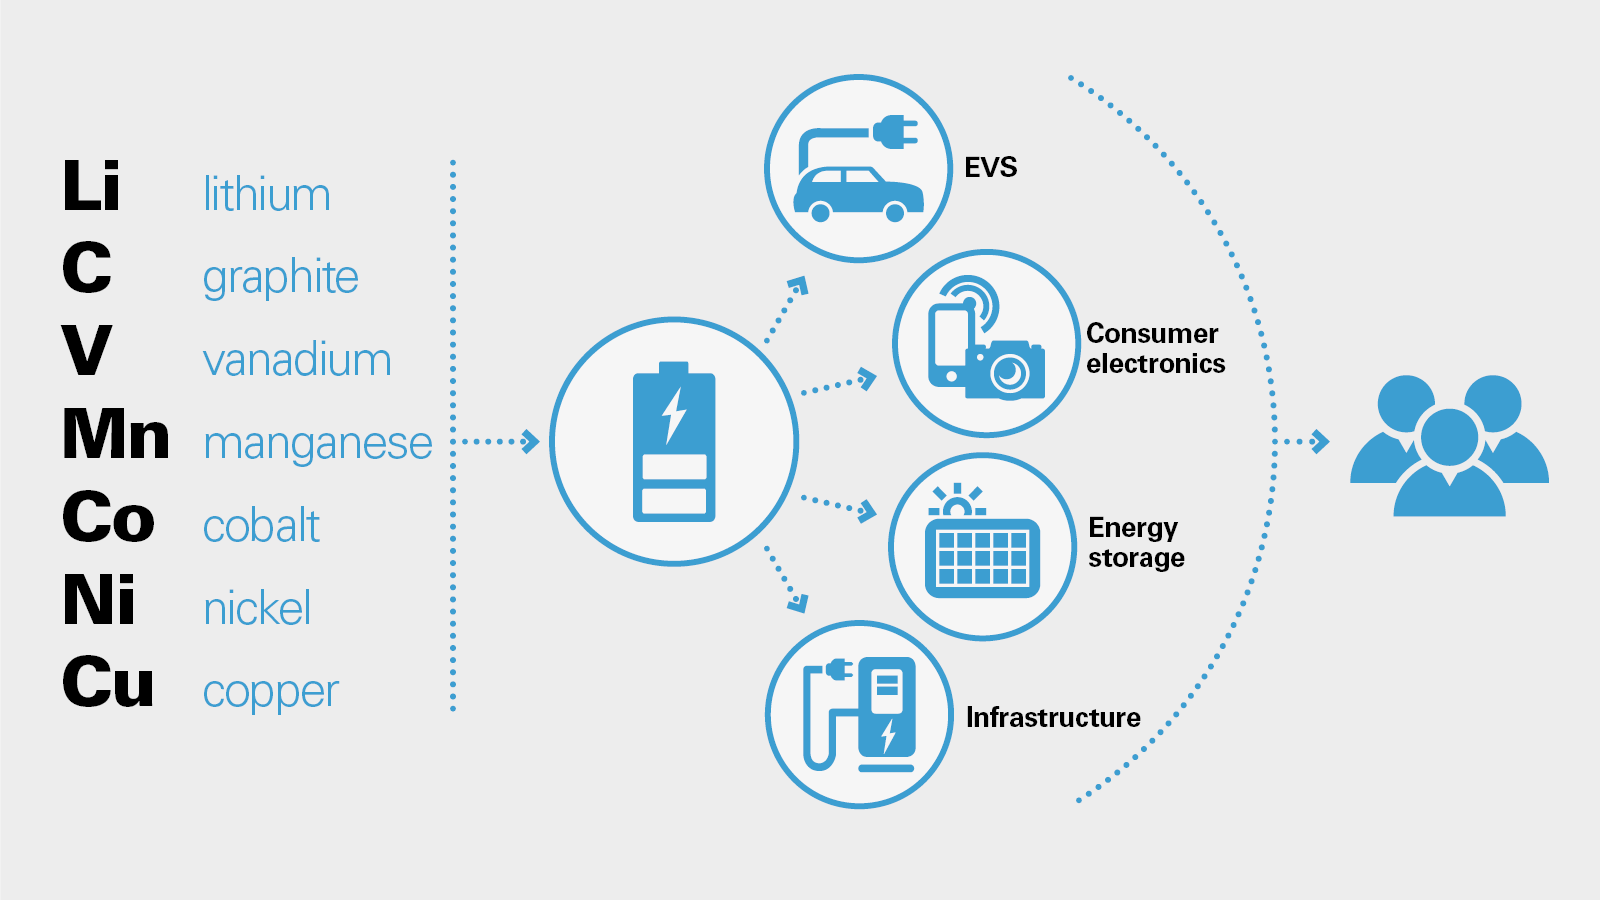 infographic PNG shows lithium, graphite, vanadium, manganese, cobalt, nickel and copper in the battery supply chain of electric cars, consumer electronics, energy storage and infrastructure